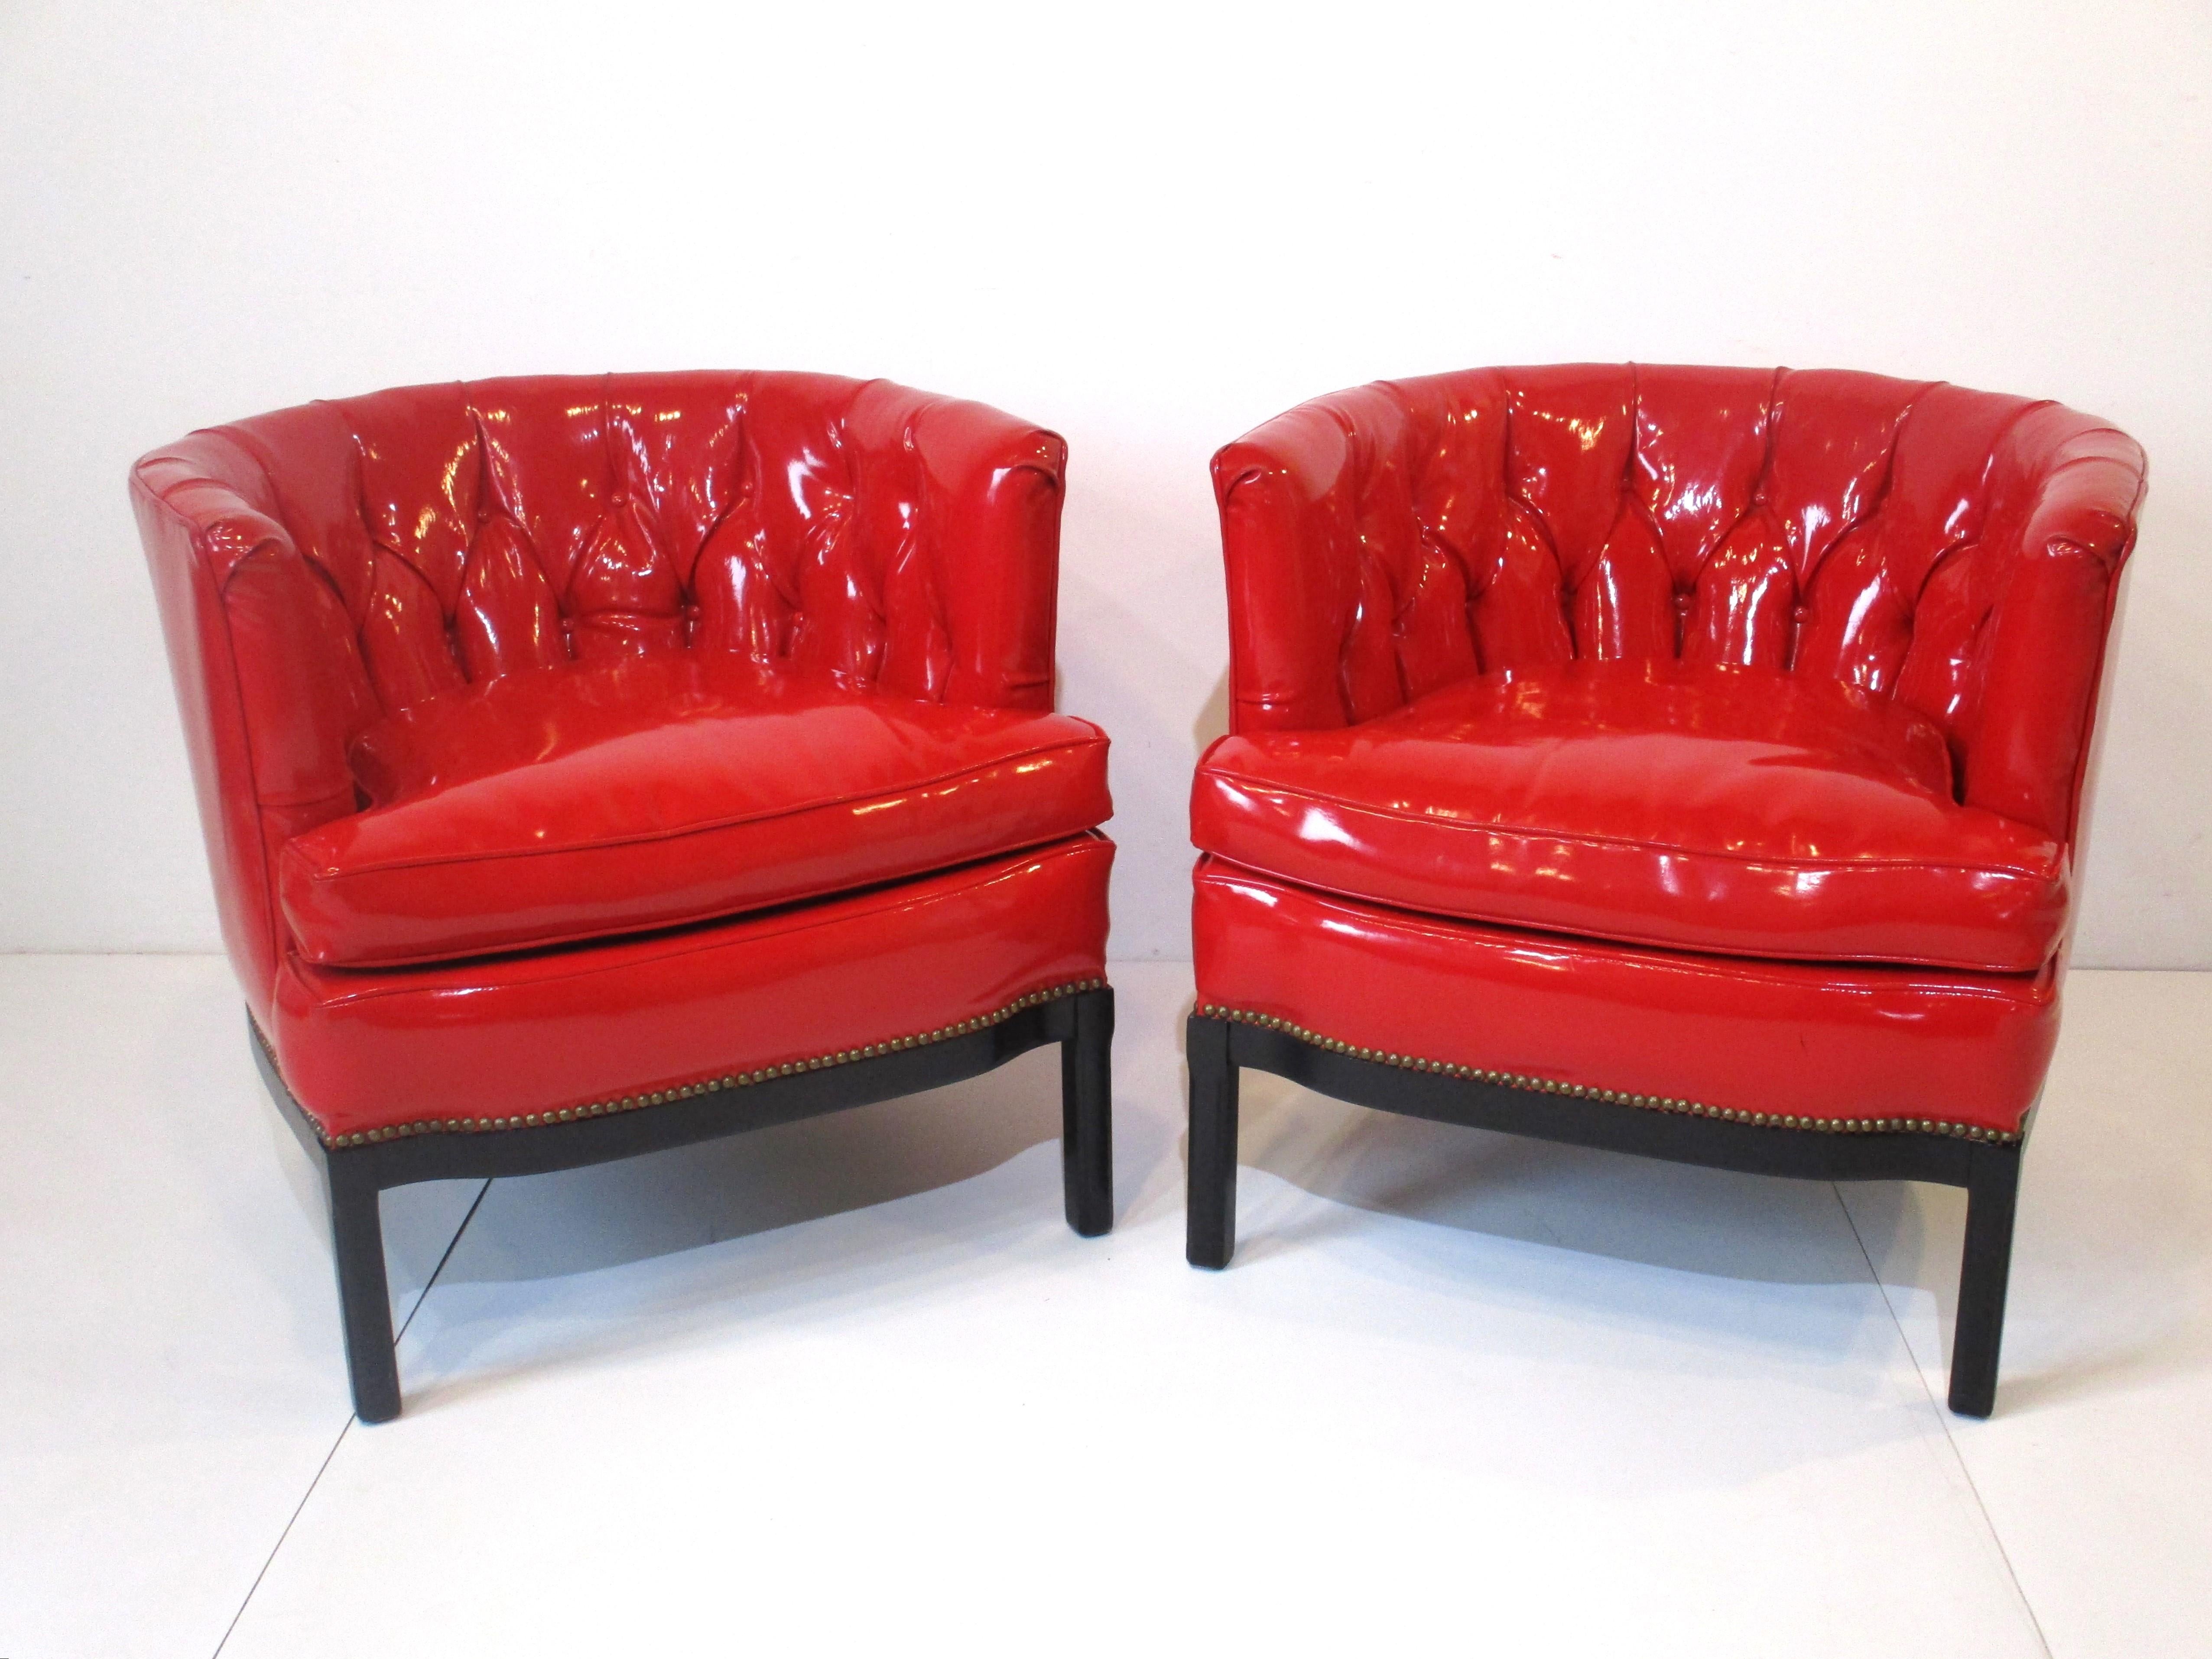 A fantistic pair of midcentury club chairs with tufted backs in liquid looking red Naugahyde having satin black legs and lower brass stud trim. Thess eye catching chairs with rounded backs are very comfortable and well crafted with perfect arm